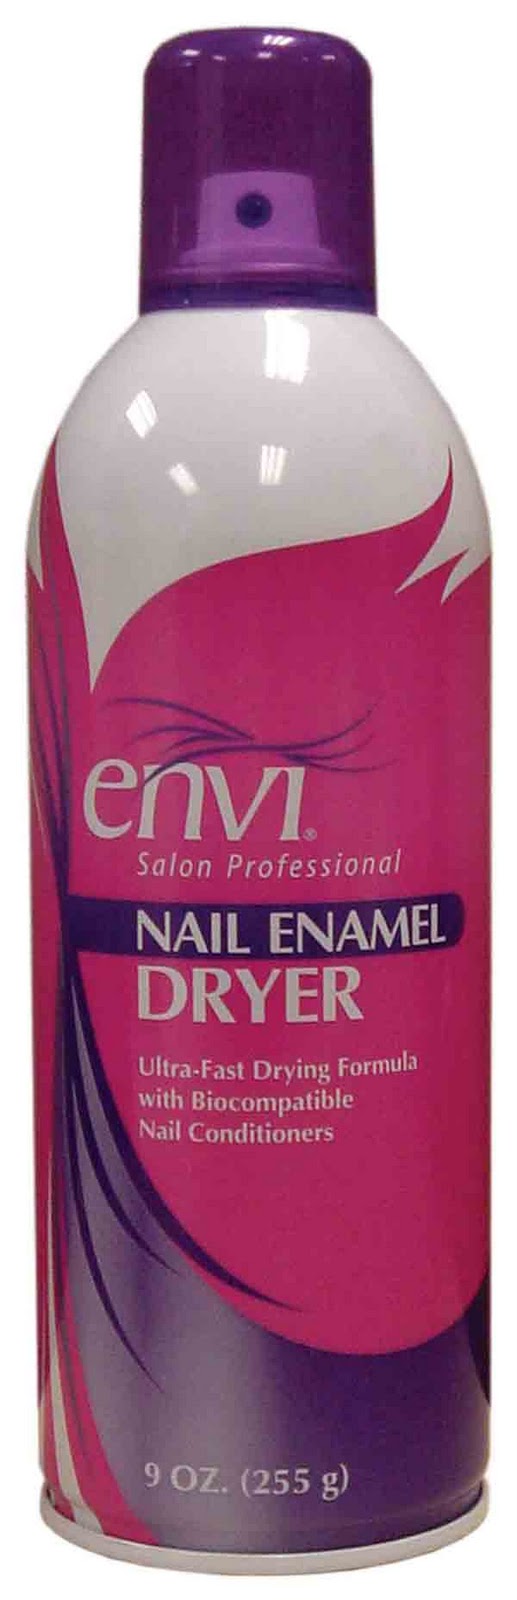 I don't usually use a nail enamel dryer because it seems like they often